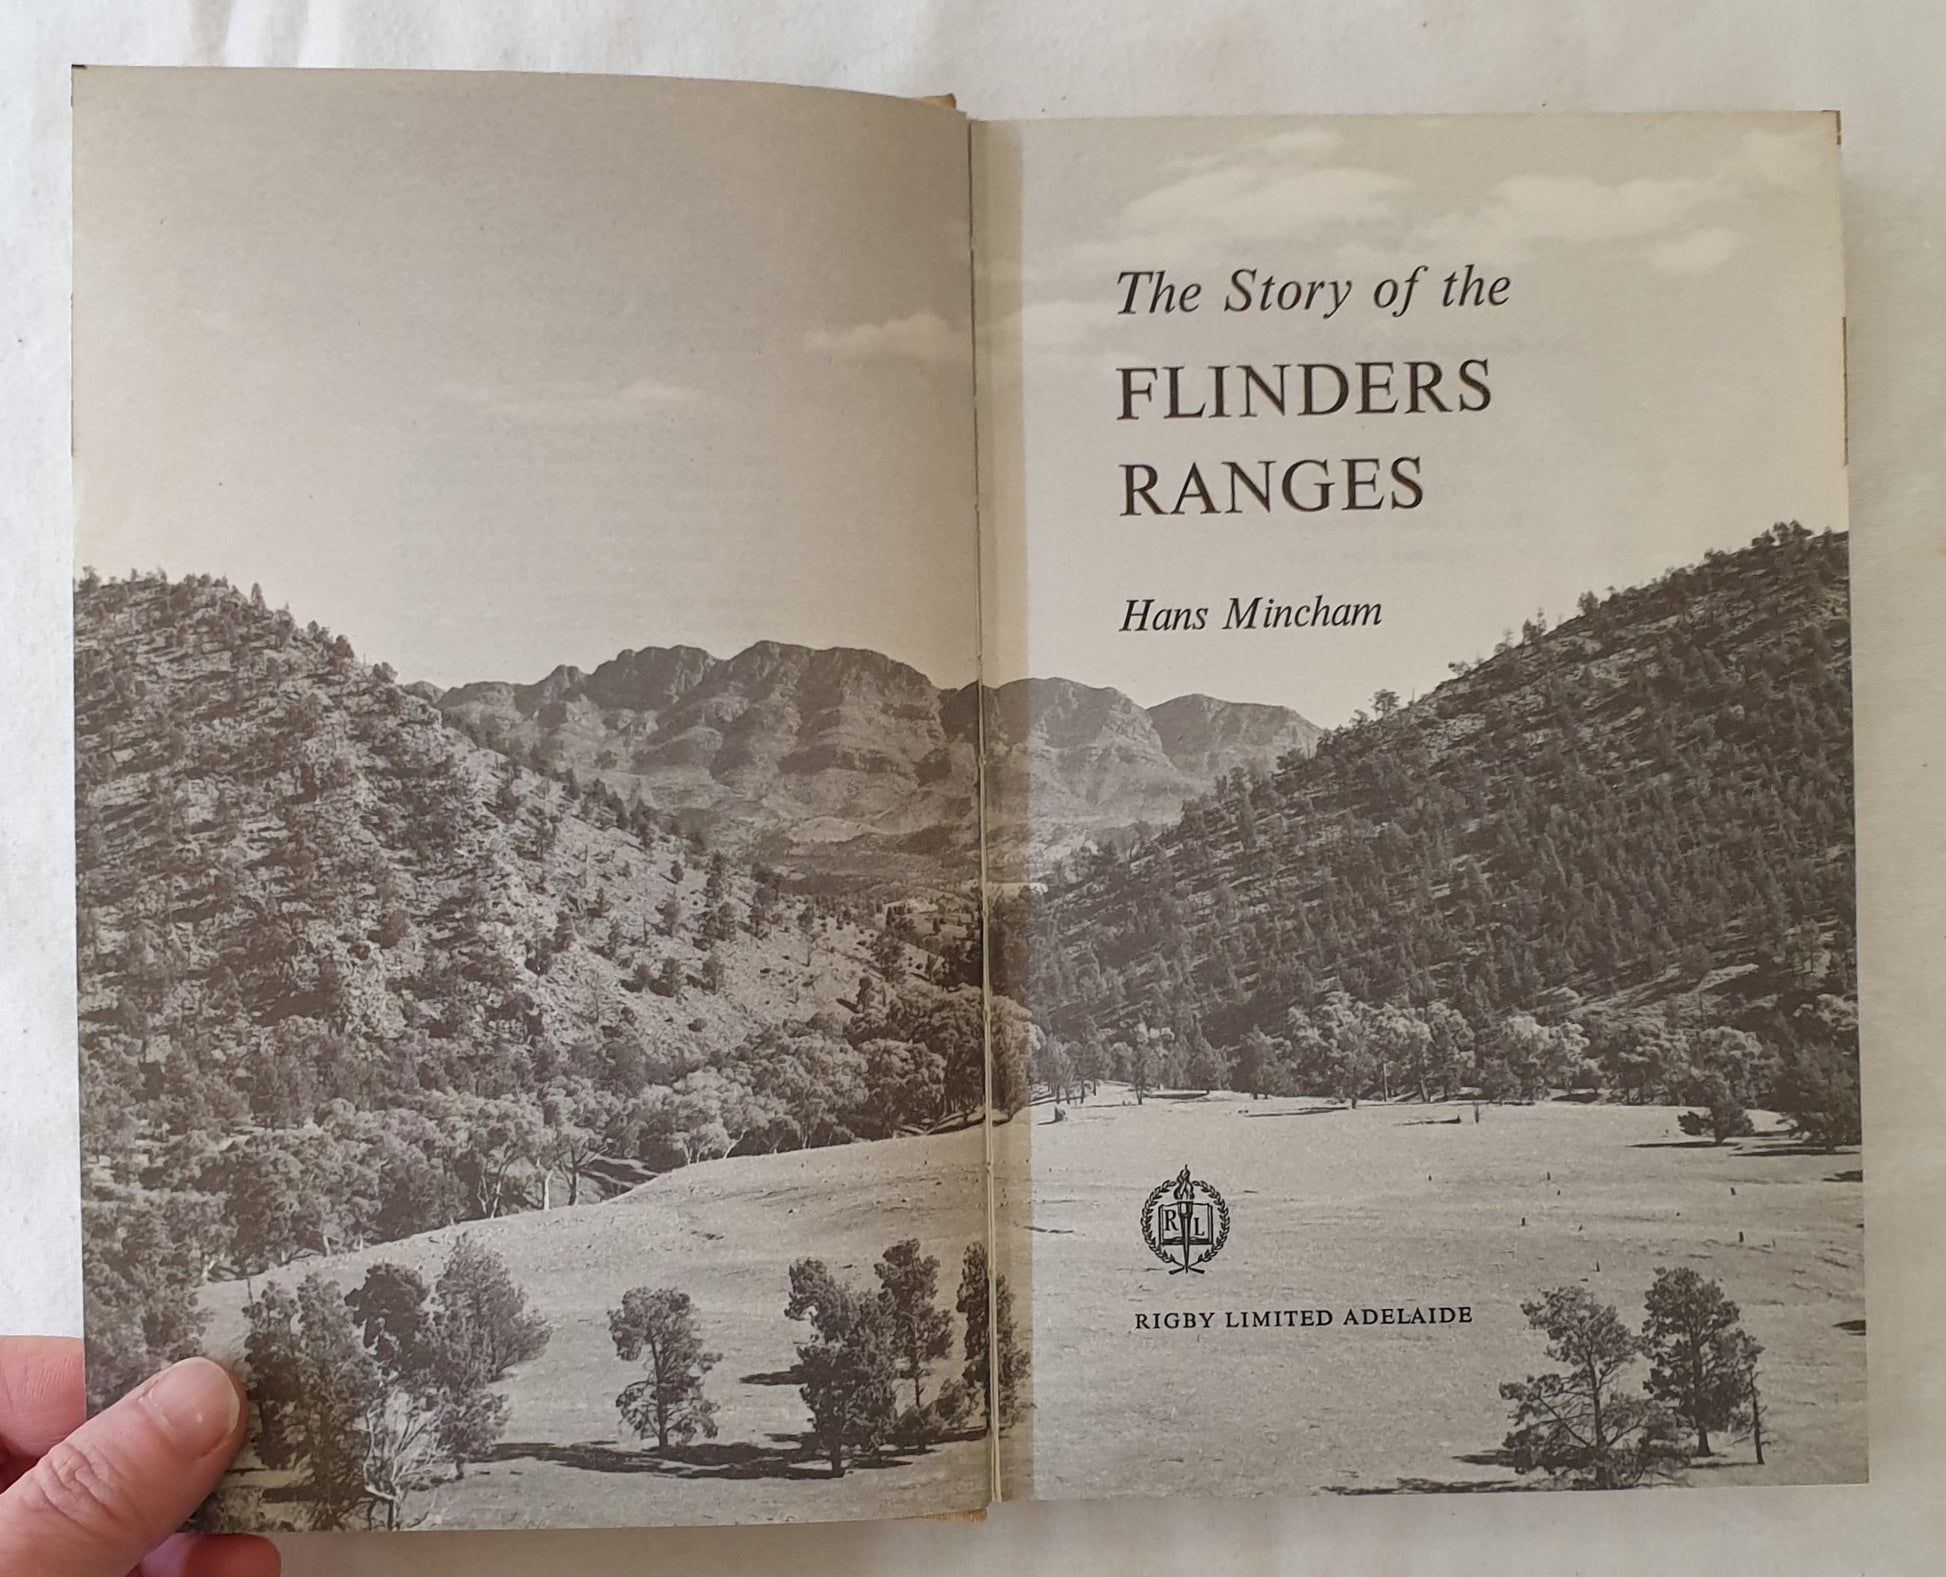 The Story of the Flinders Ranges by Hans Mincham